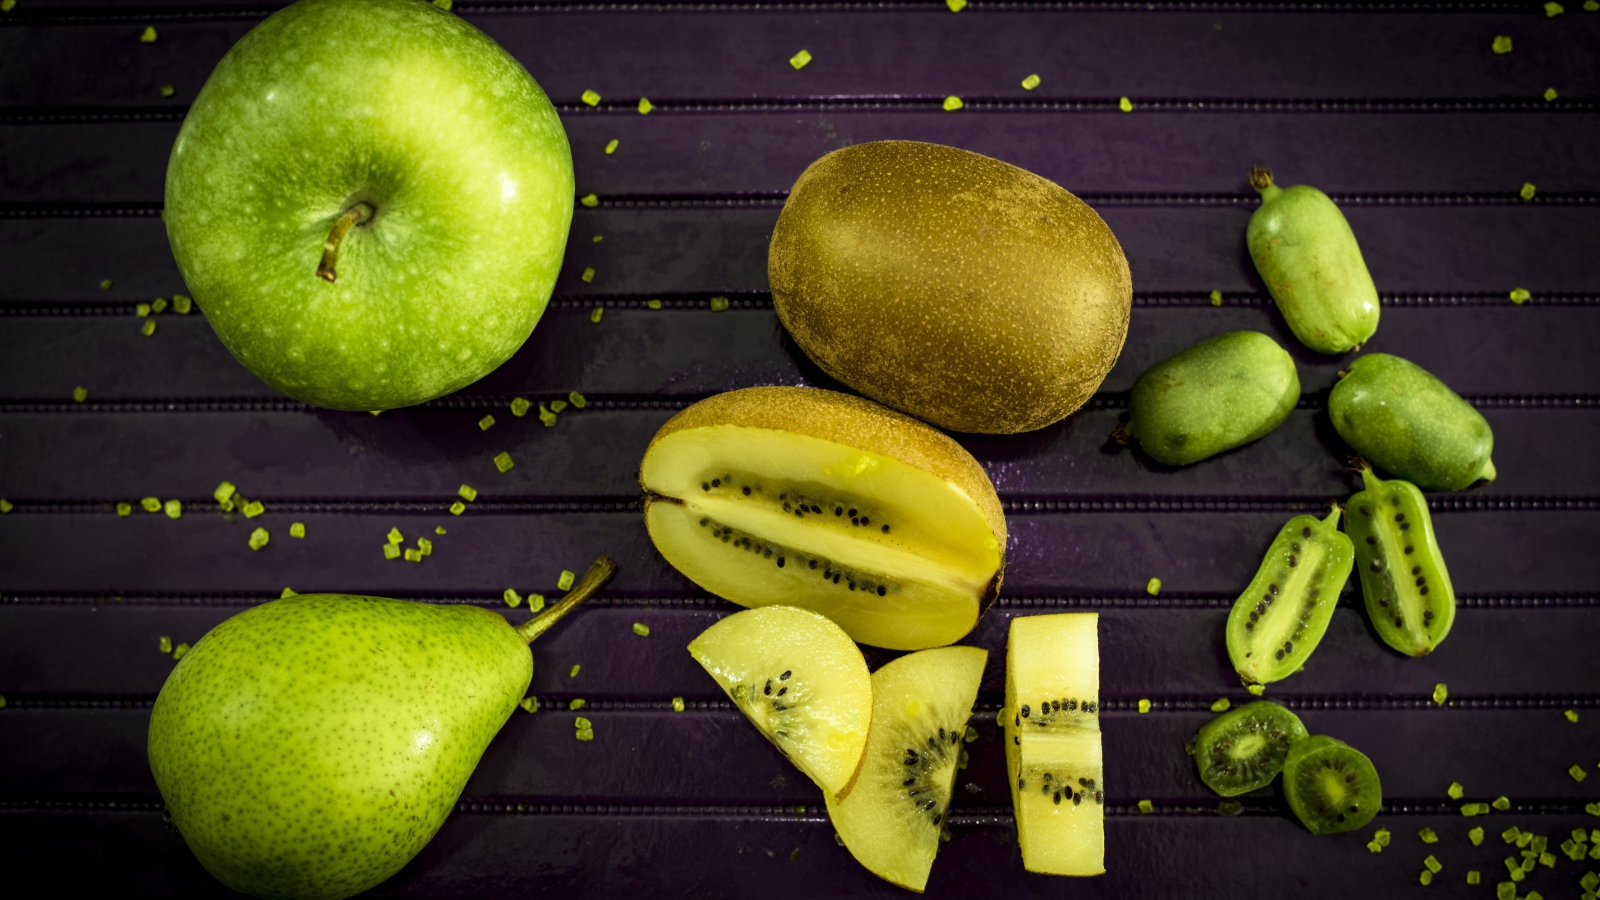 Green apple on the table with pear, kiwi and feijoa